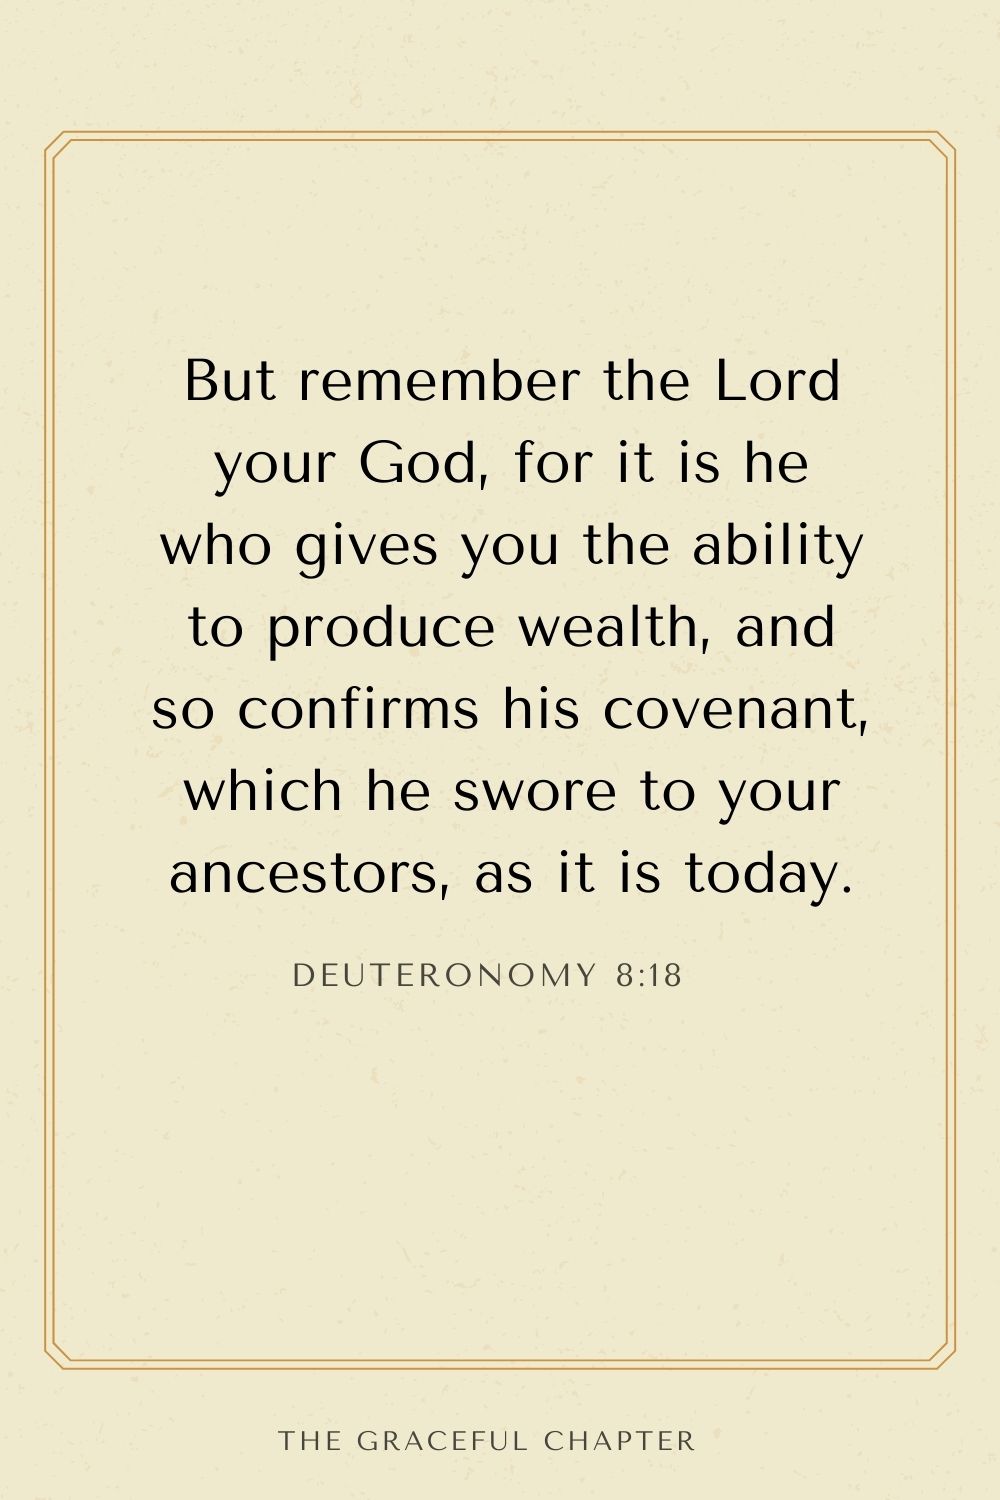 But remember the Lord your God, for it is he who gives you the ability to produce wealth, and so confirms his covenant, which he swore to your ancestors, as it is today. Deuteronomy 8:18